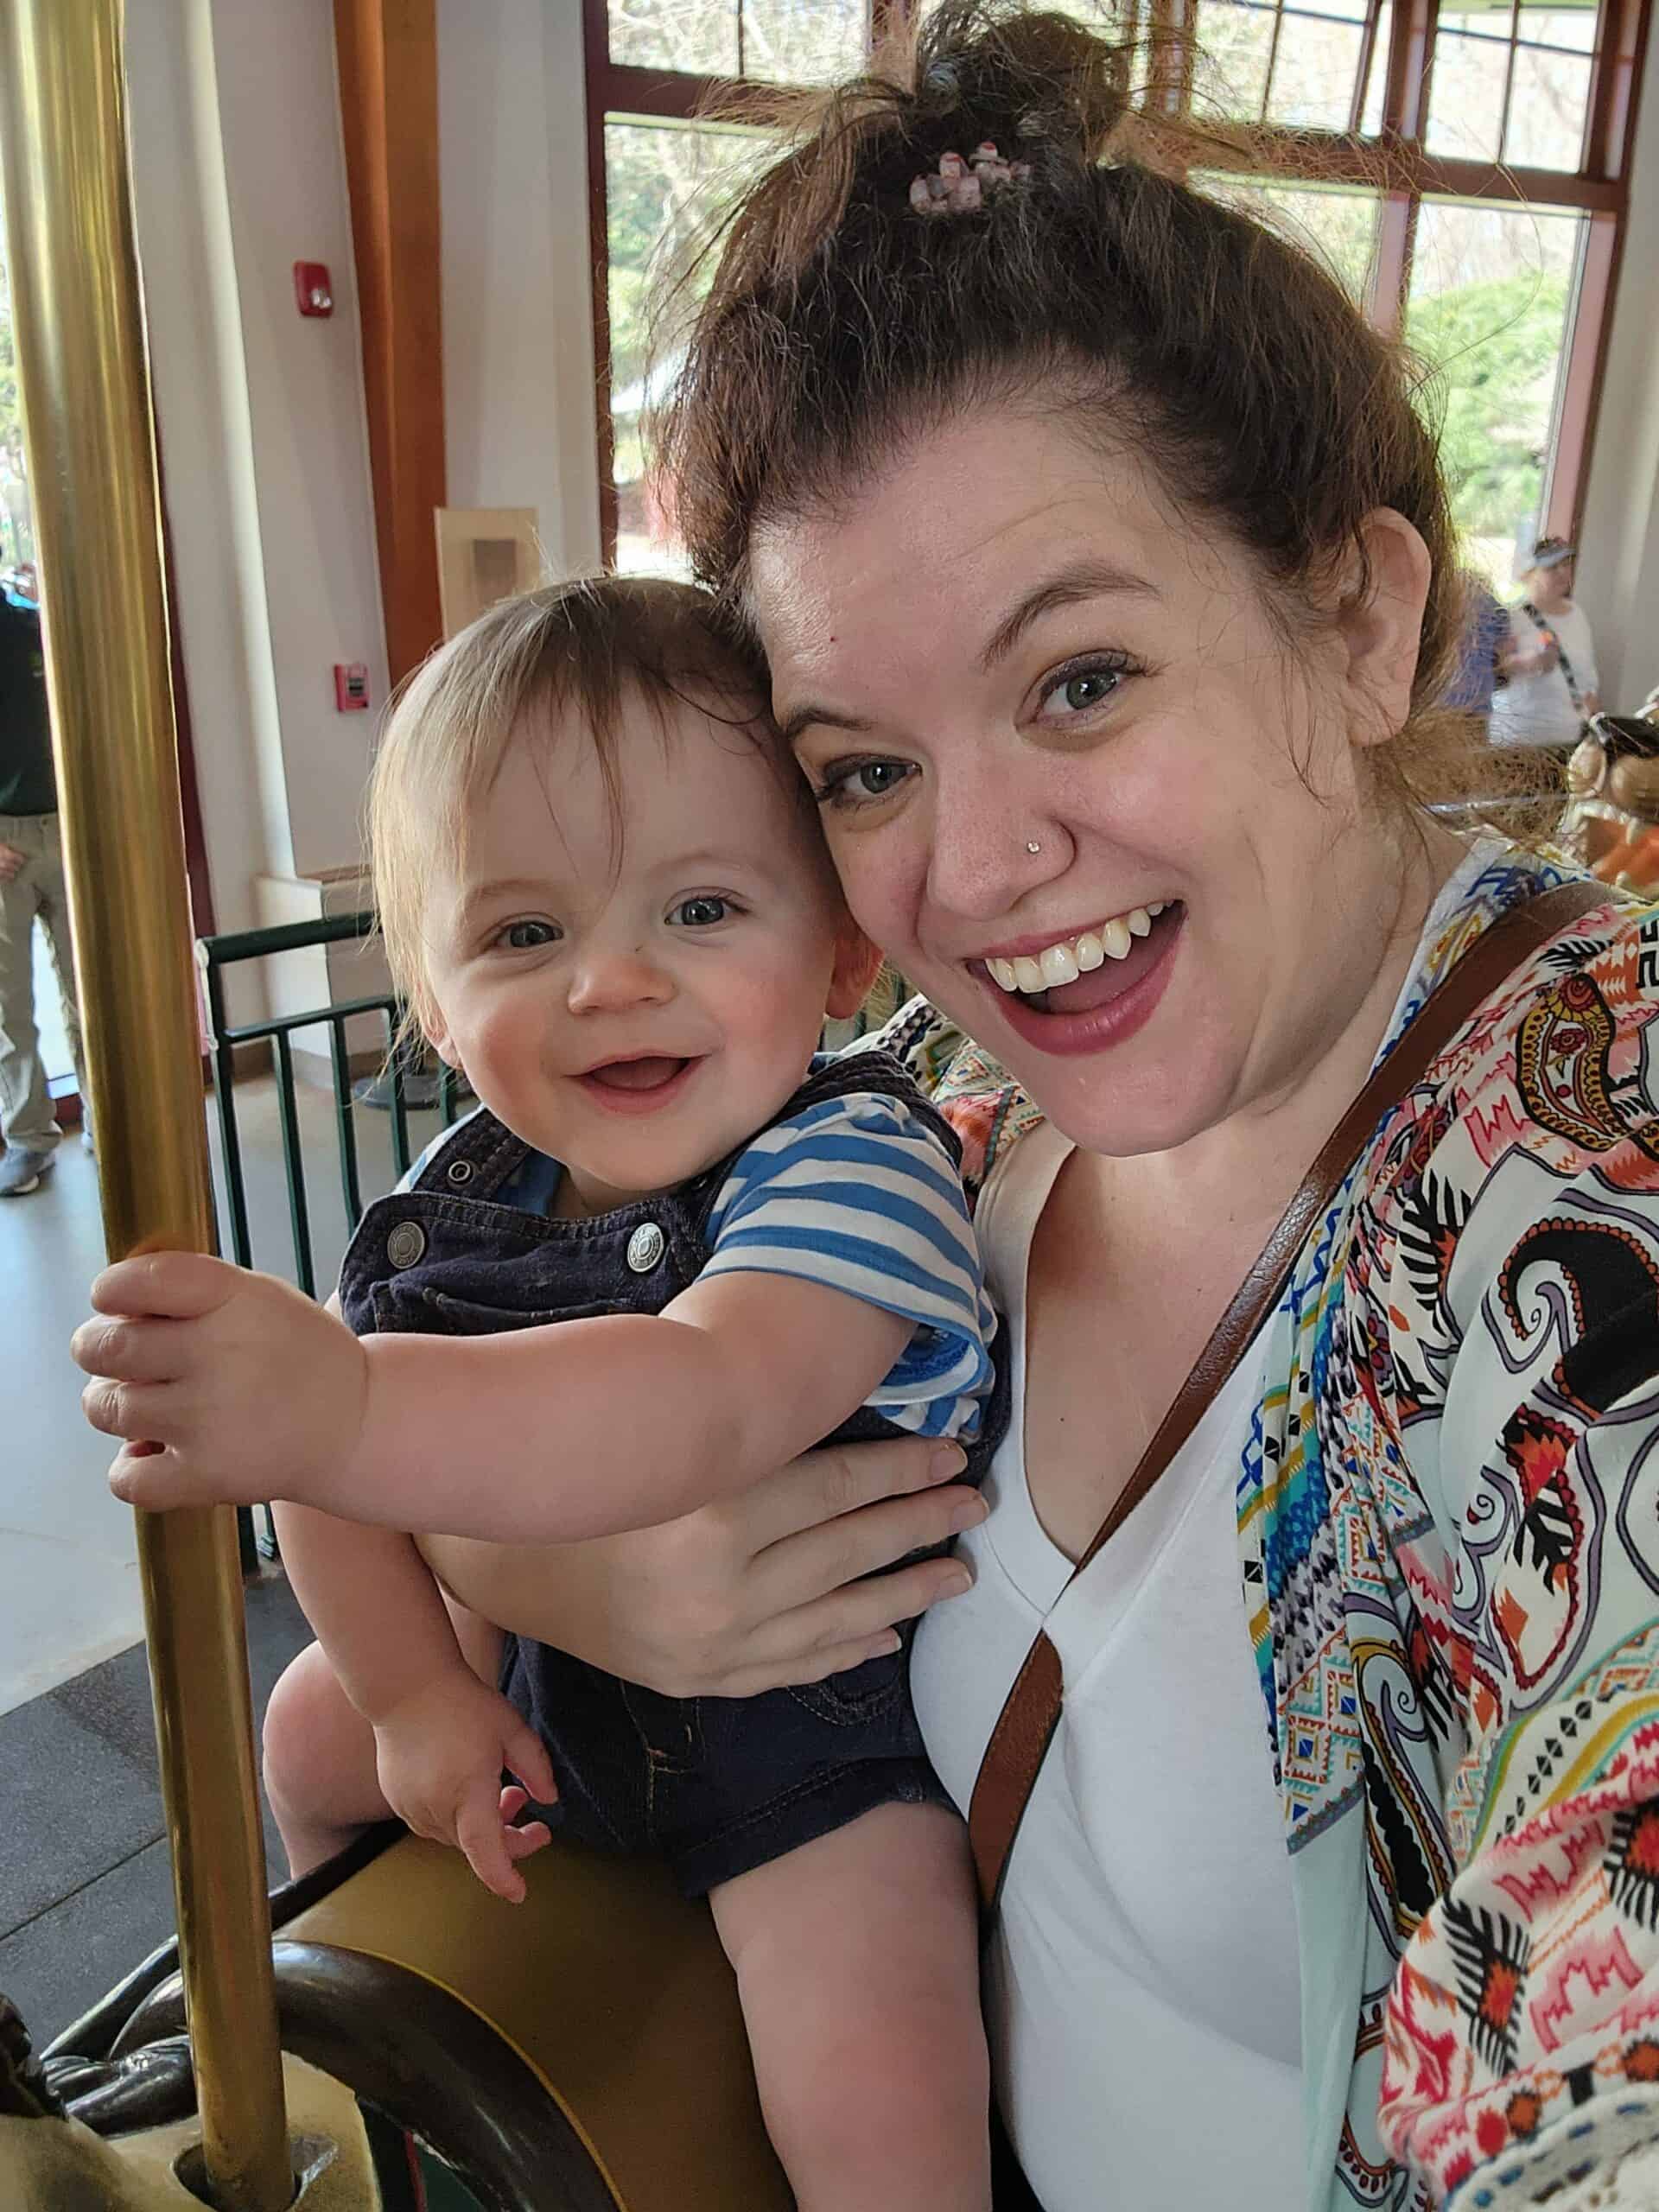 A heartwarming selfie of a woman and a baby sharing a joyful moment on a carousel ride, with the baby gripping the golden pole and both wearing bright, happy smiles